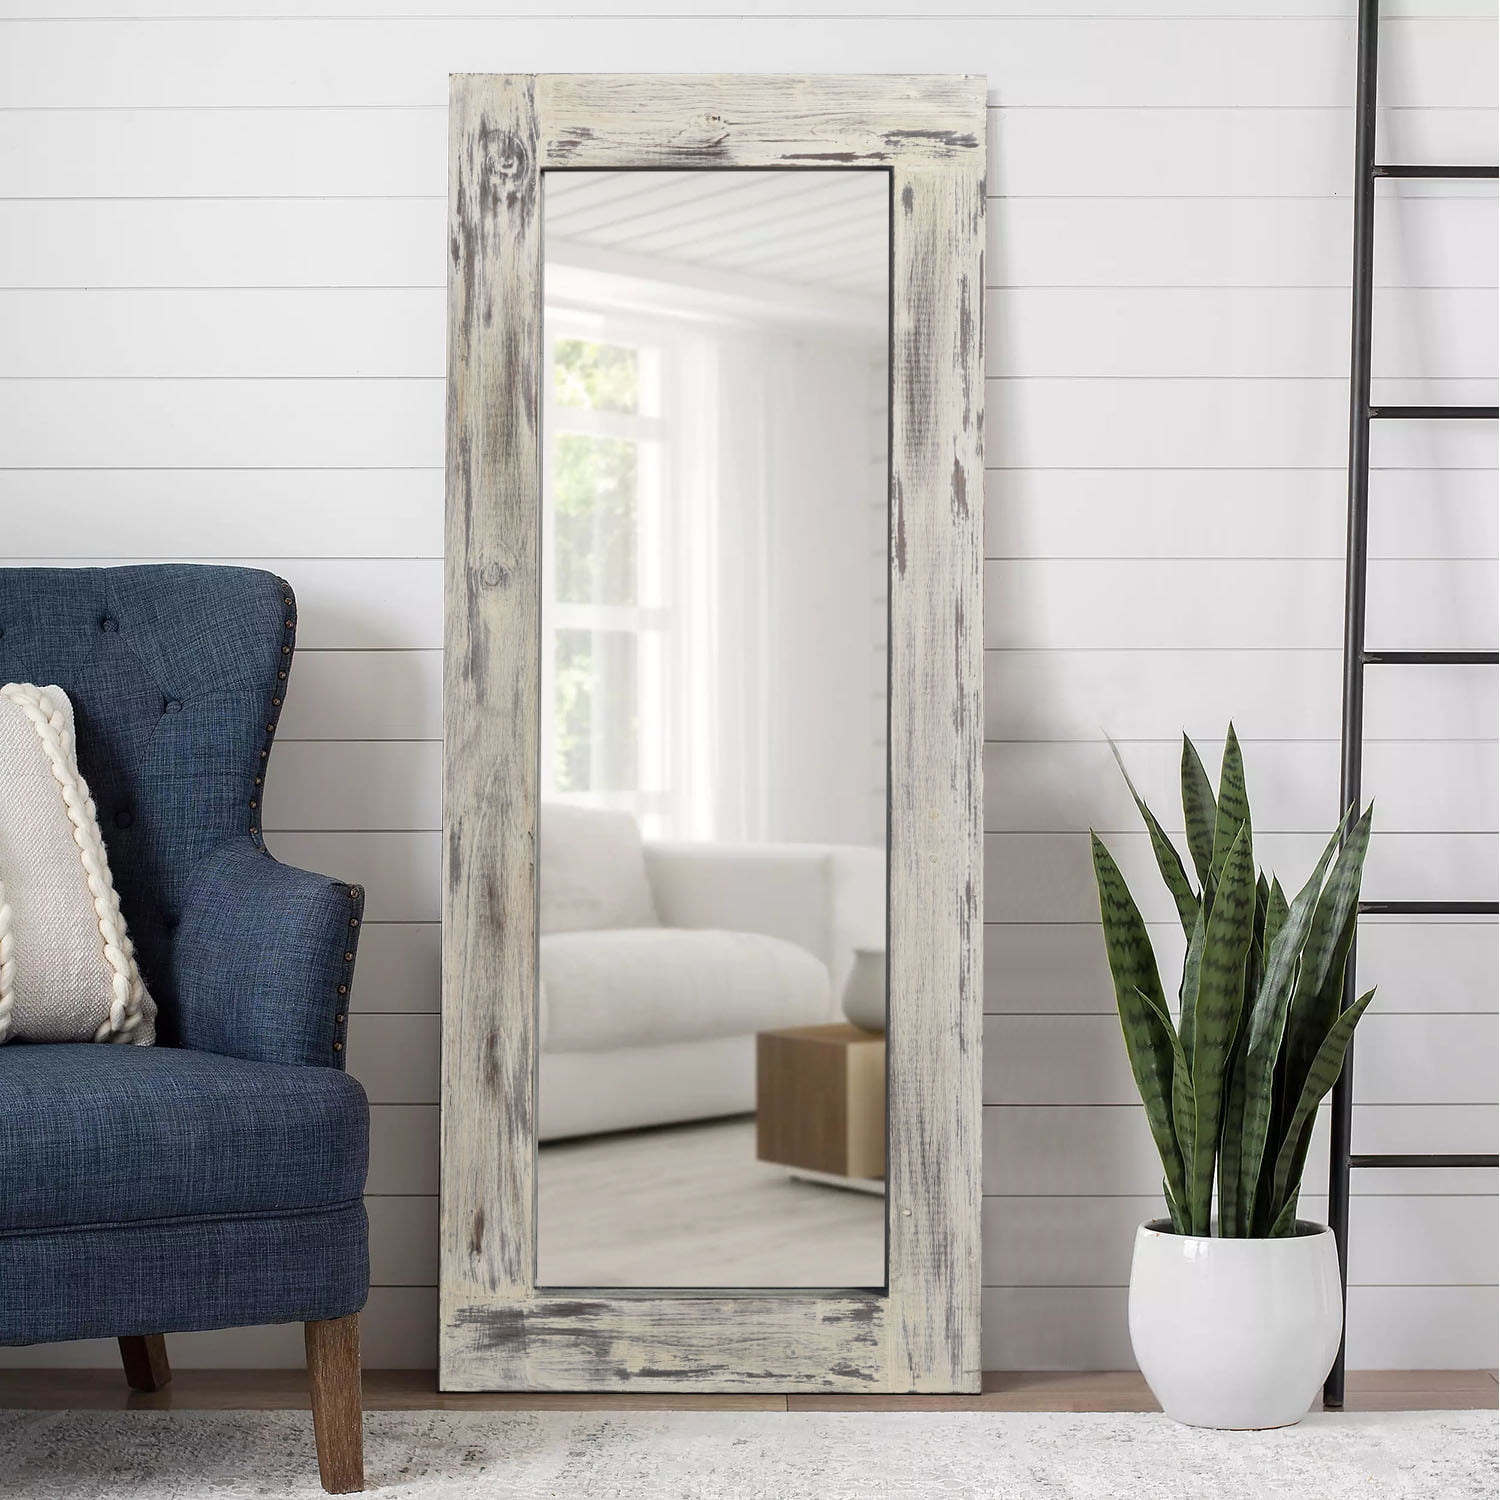 NeuType Rustic Solid Wood Mirror Full Length Mirror Floor Mirror Country Style (Weathered White